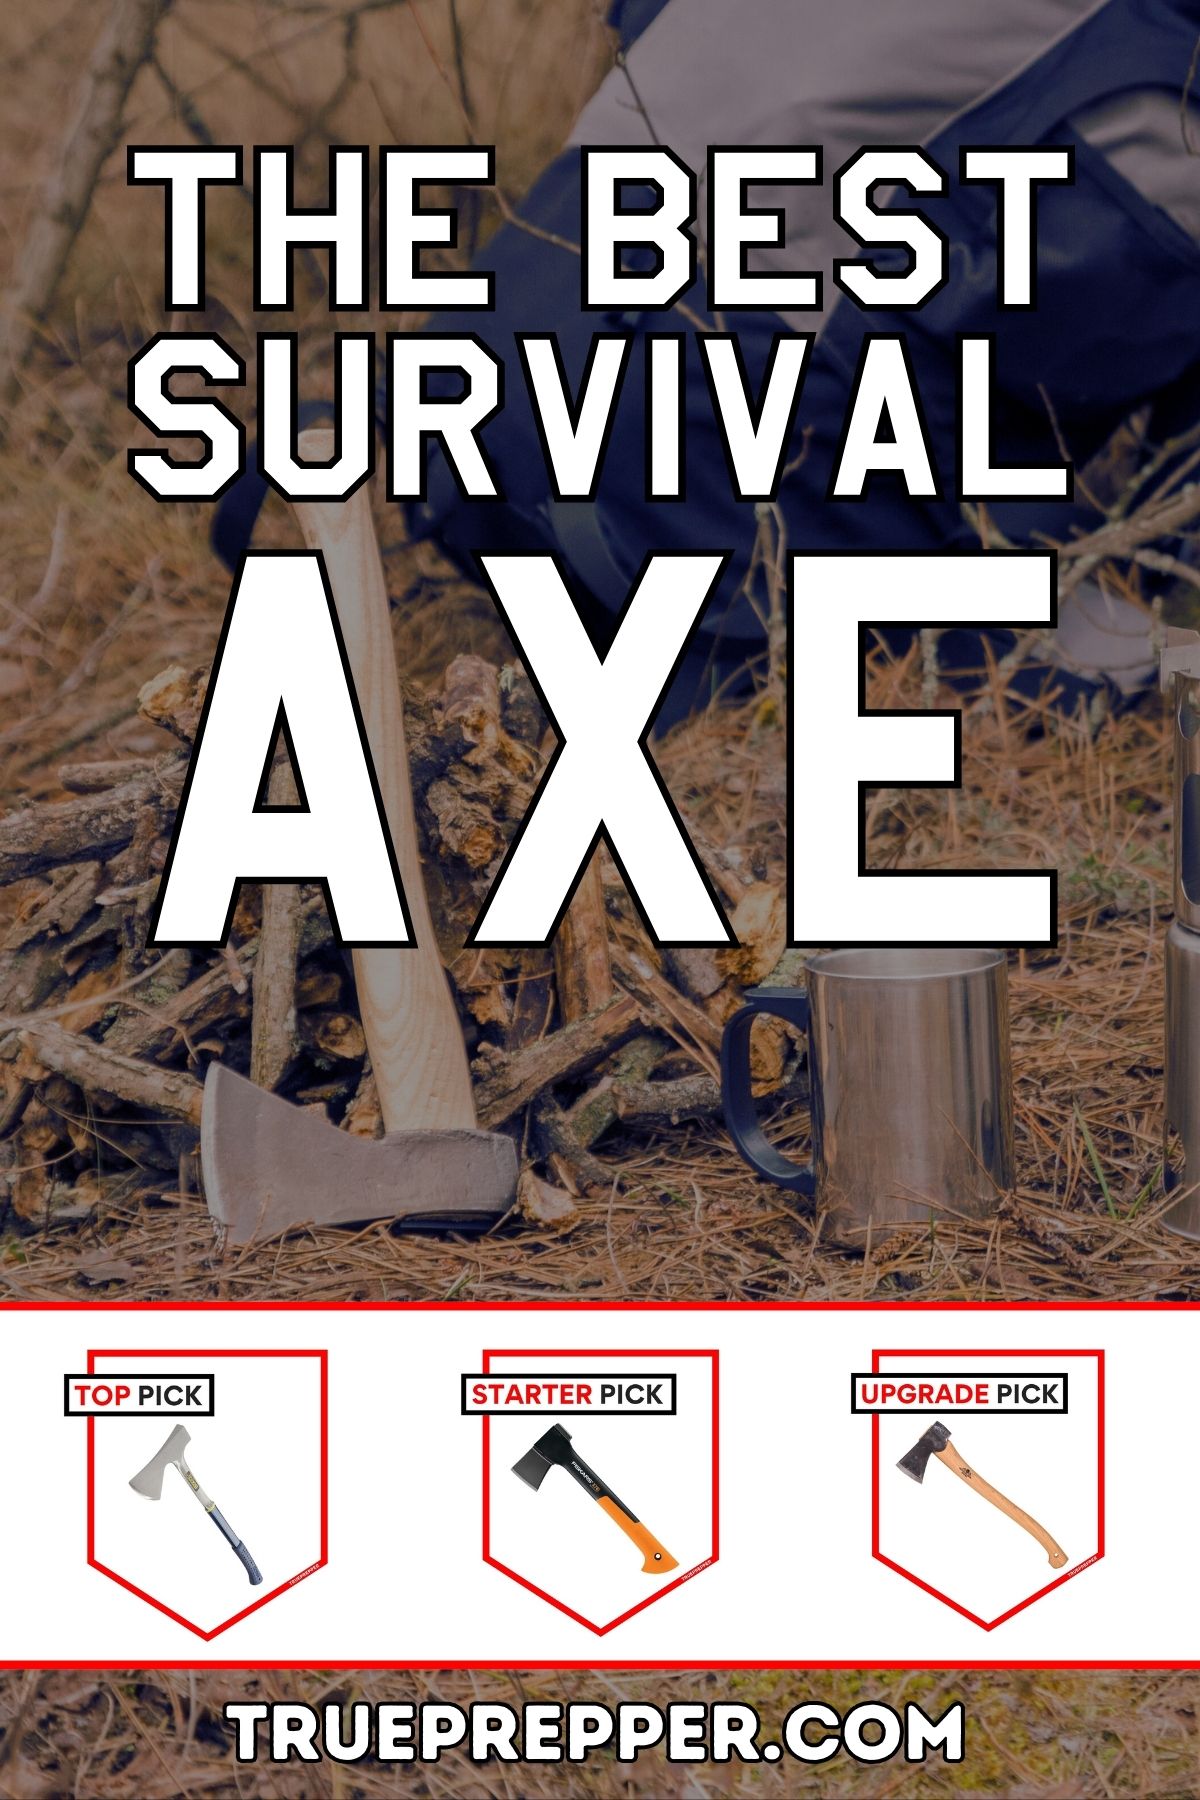 The Best Survival Axe